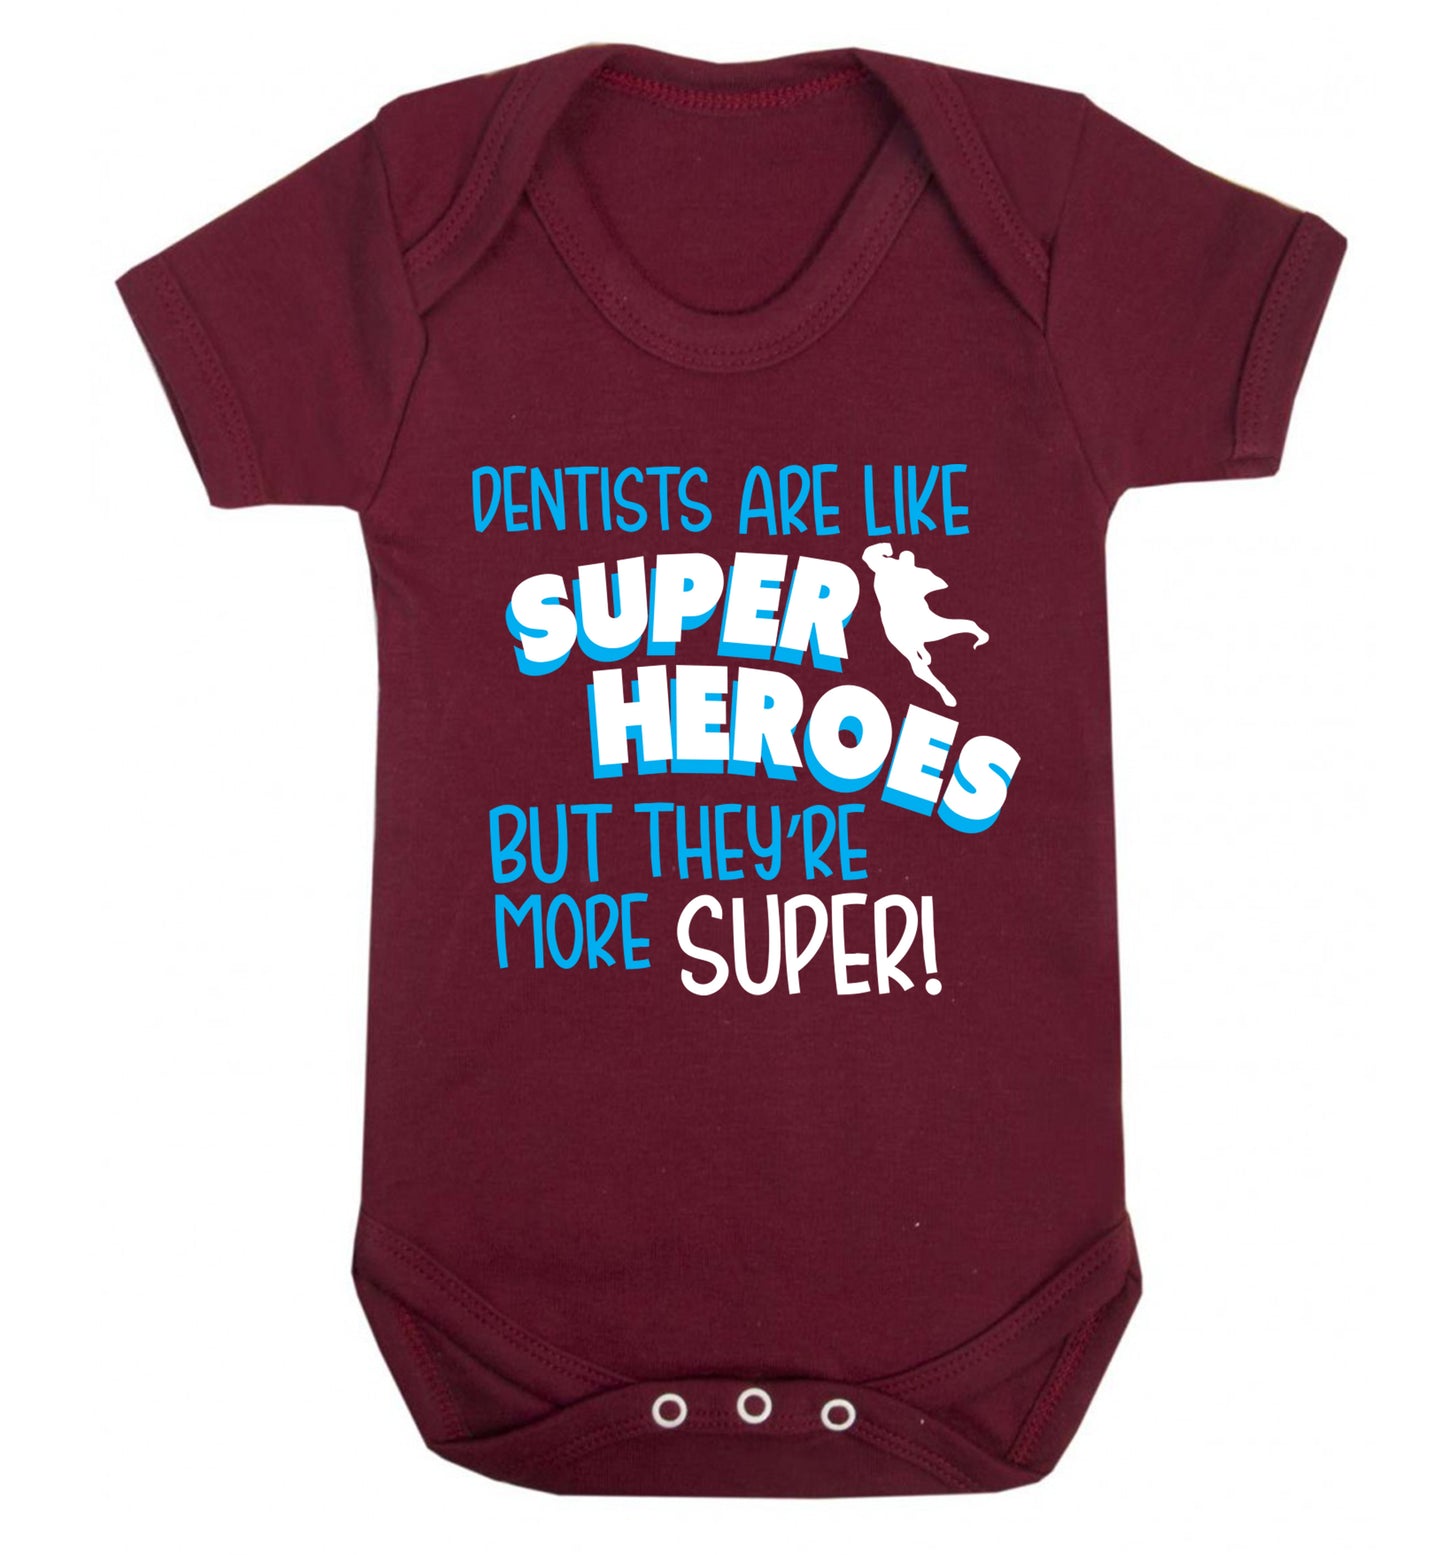 Dentists are like superheros but they're more super Baby Vest maroon 18-24 months